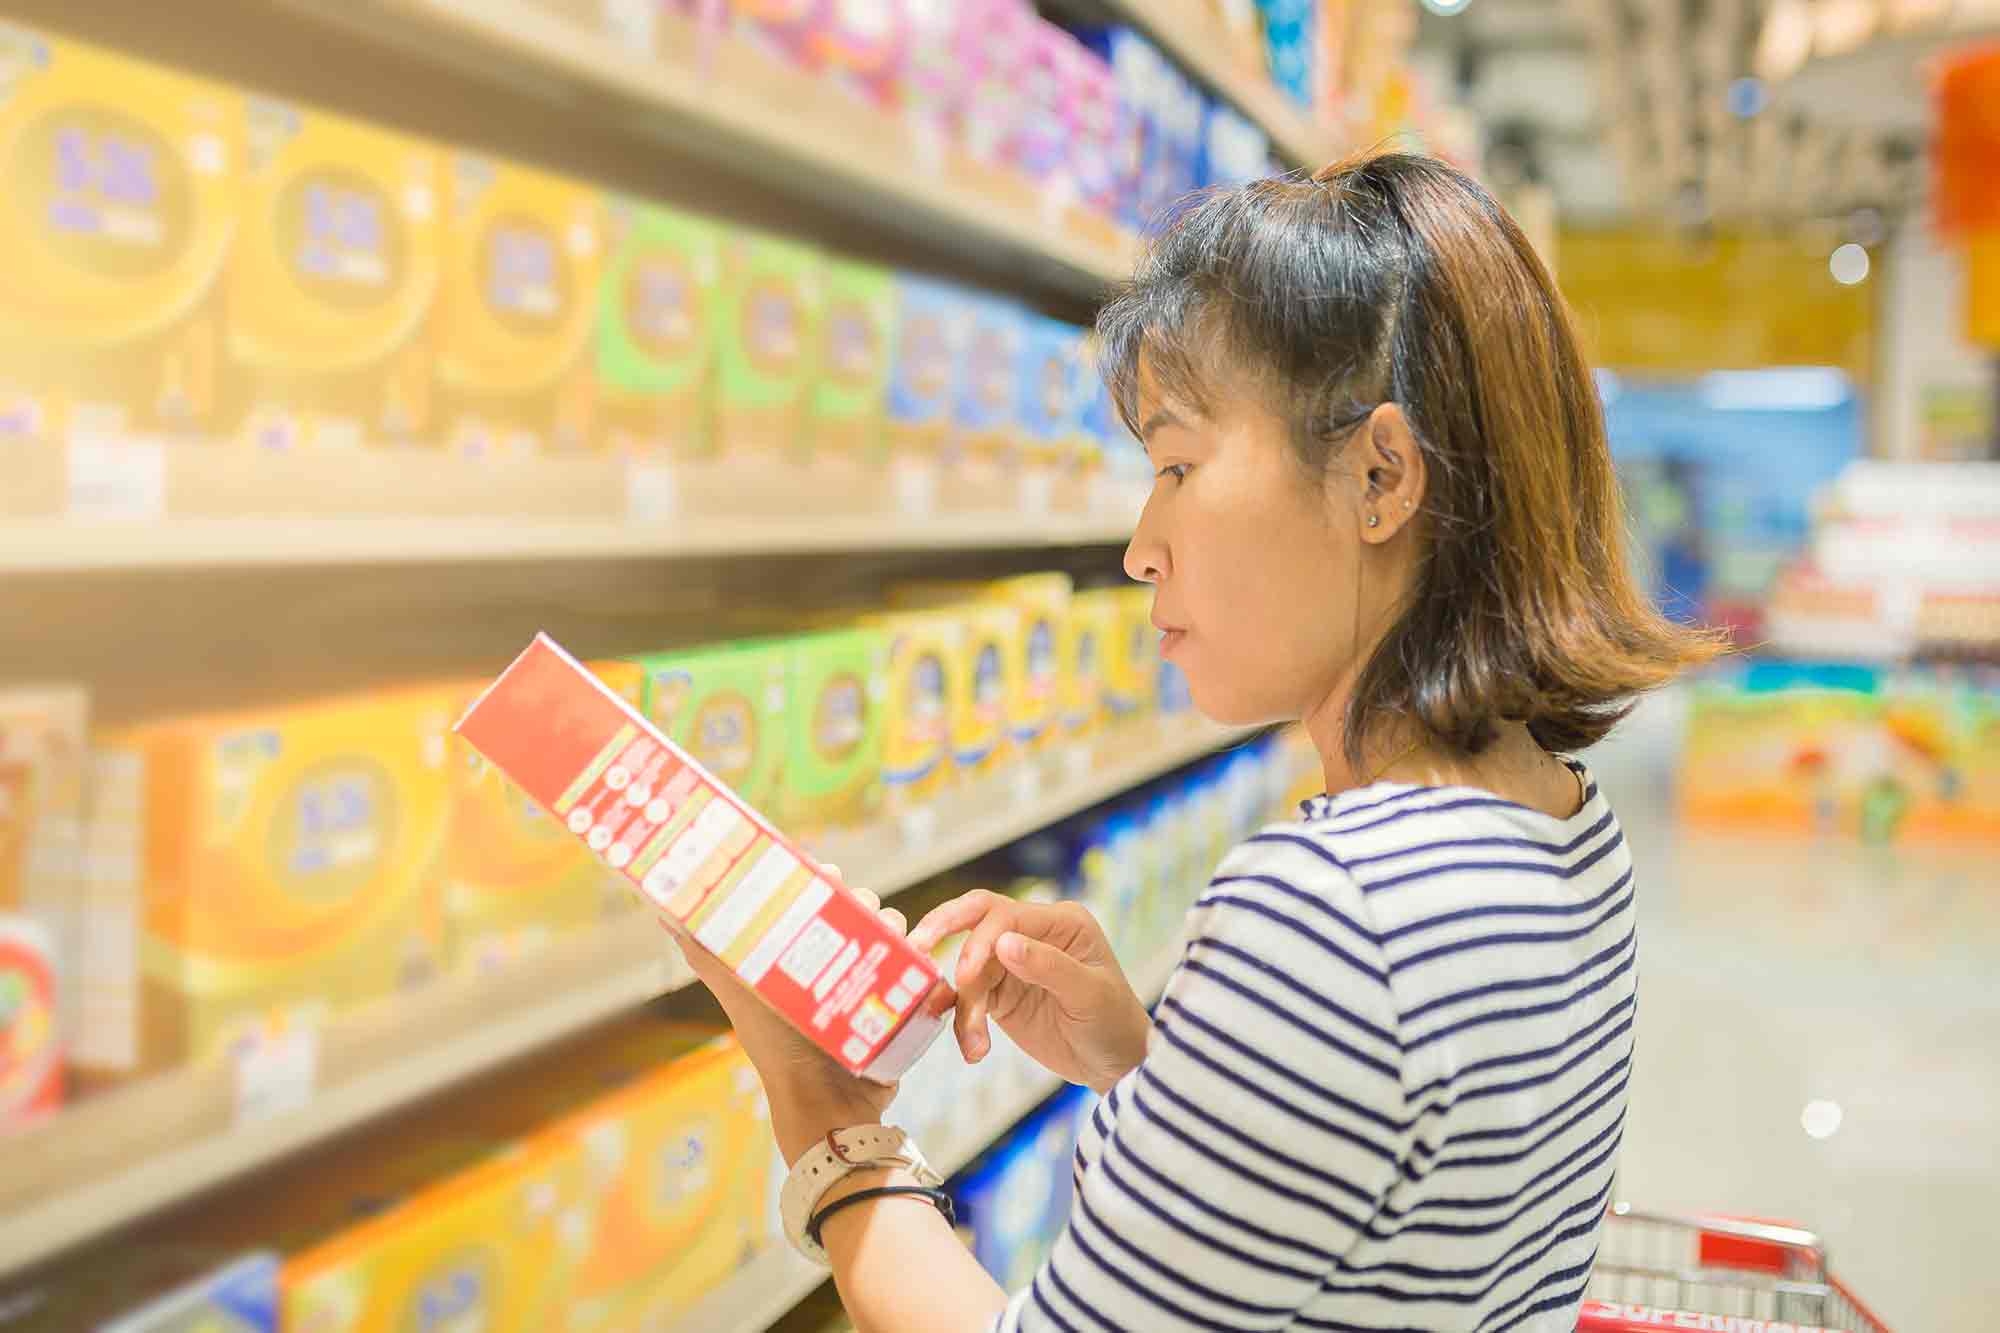 Asian Woman Reading Food label while standing grocery aisle. She managing control of what she eats